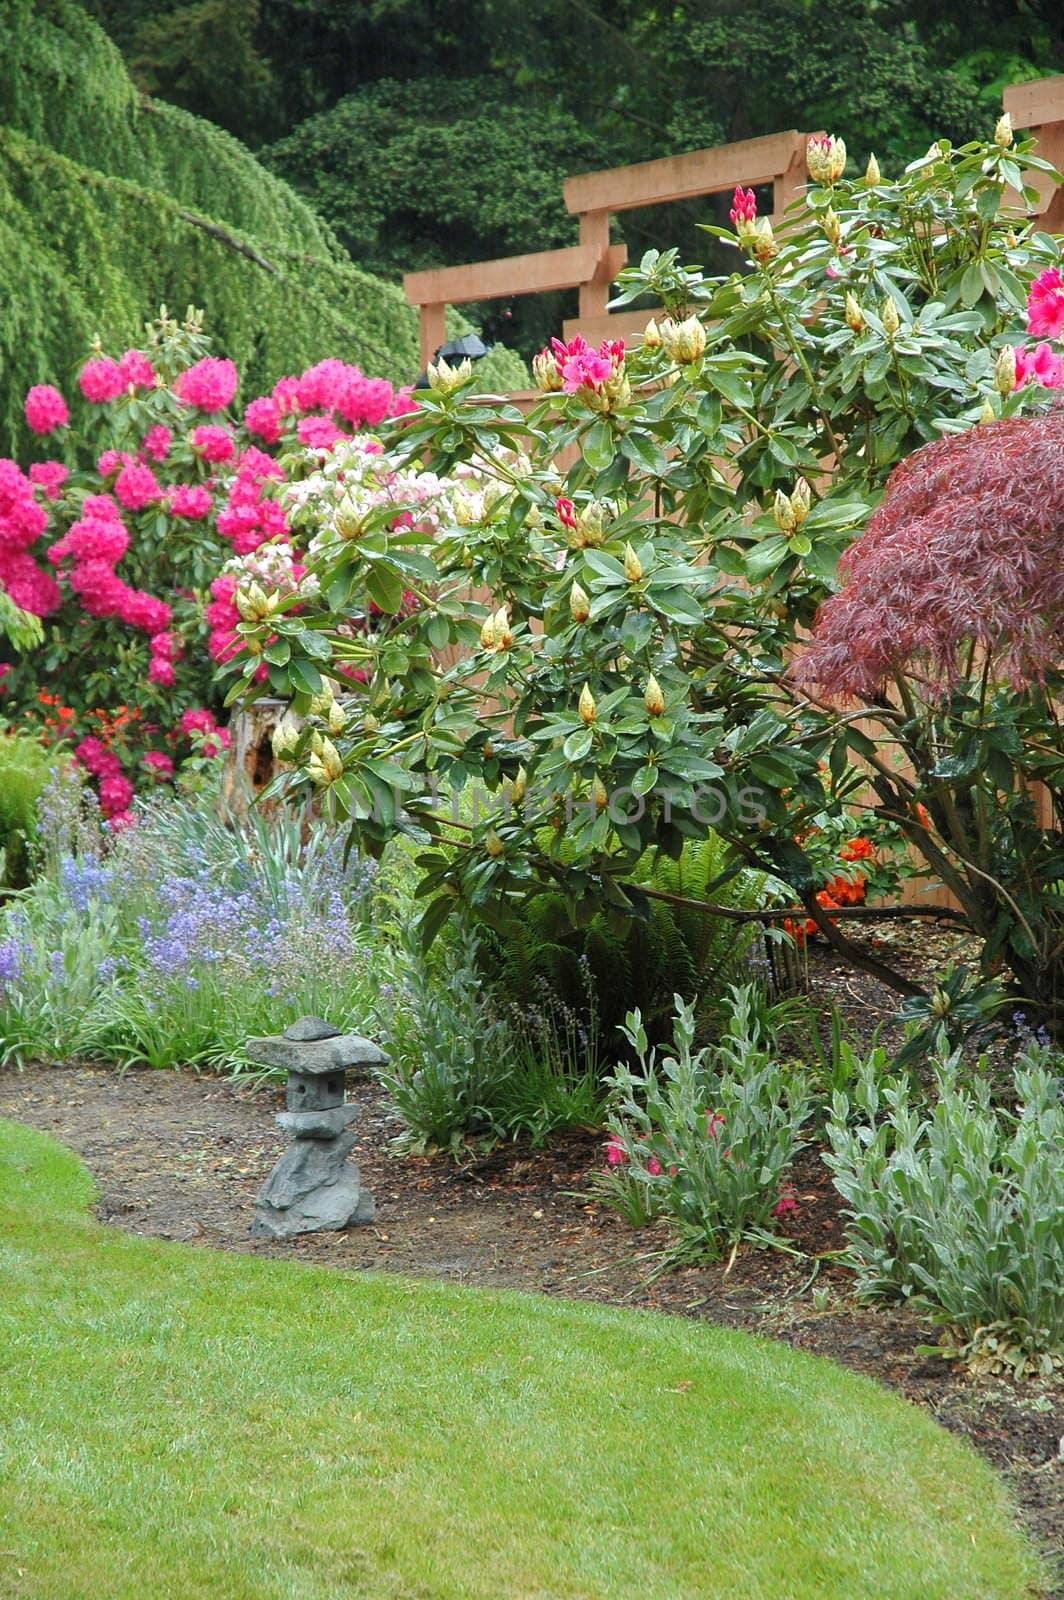 A beautiful landscaped yard with flowers, plants and trees.